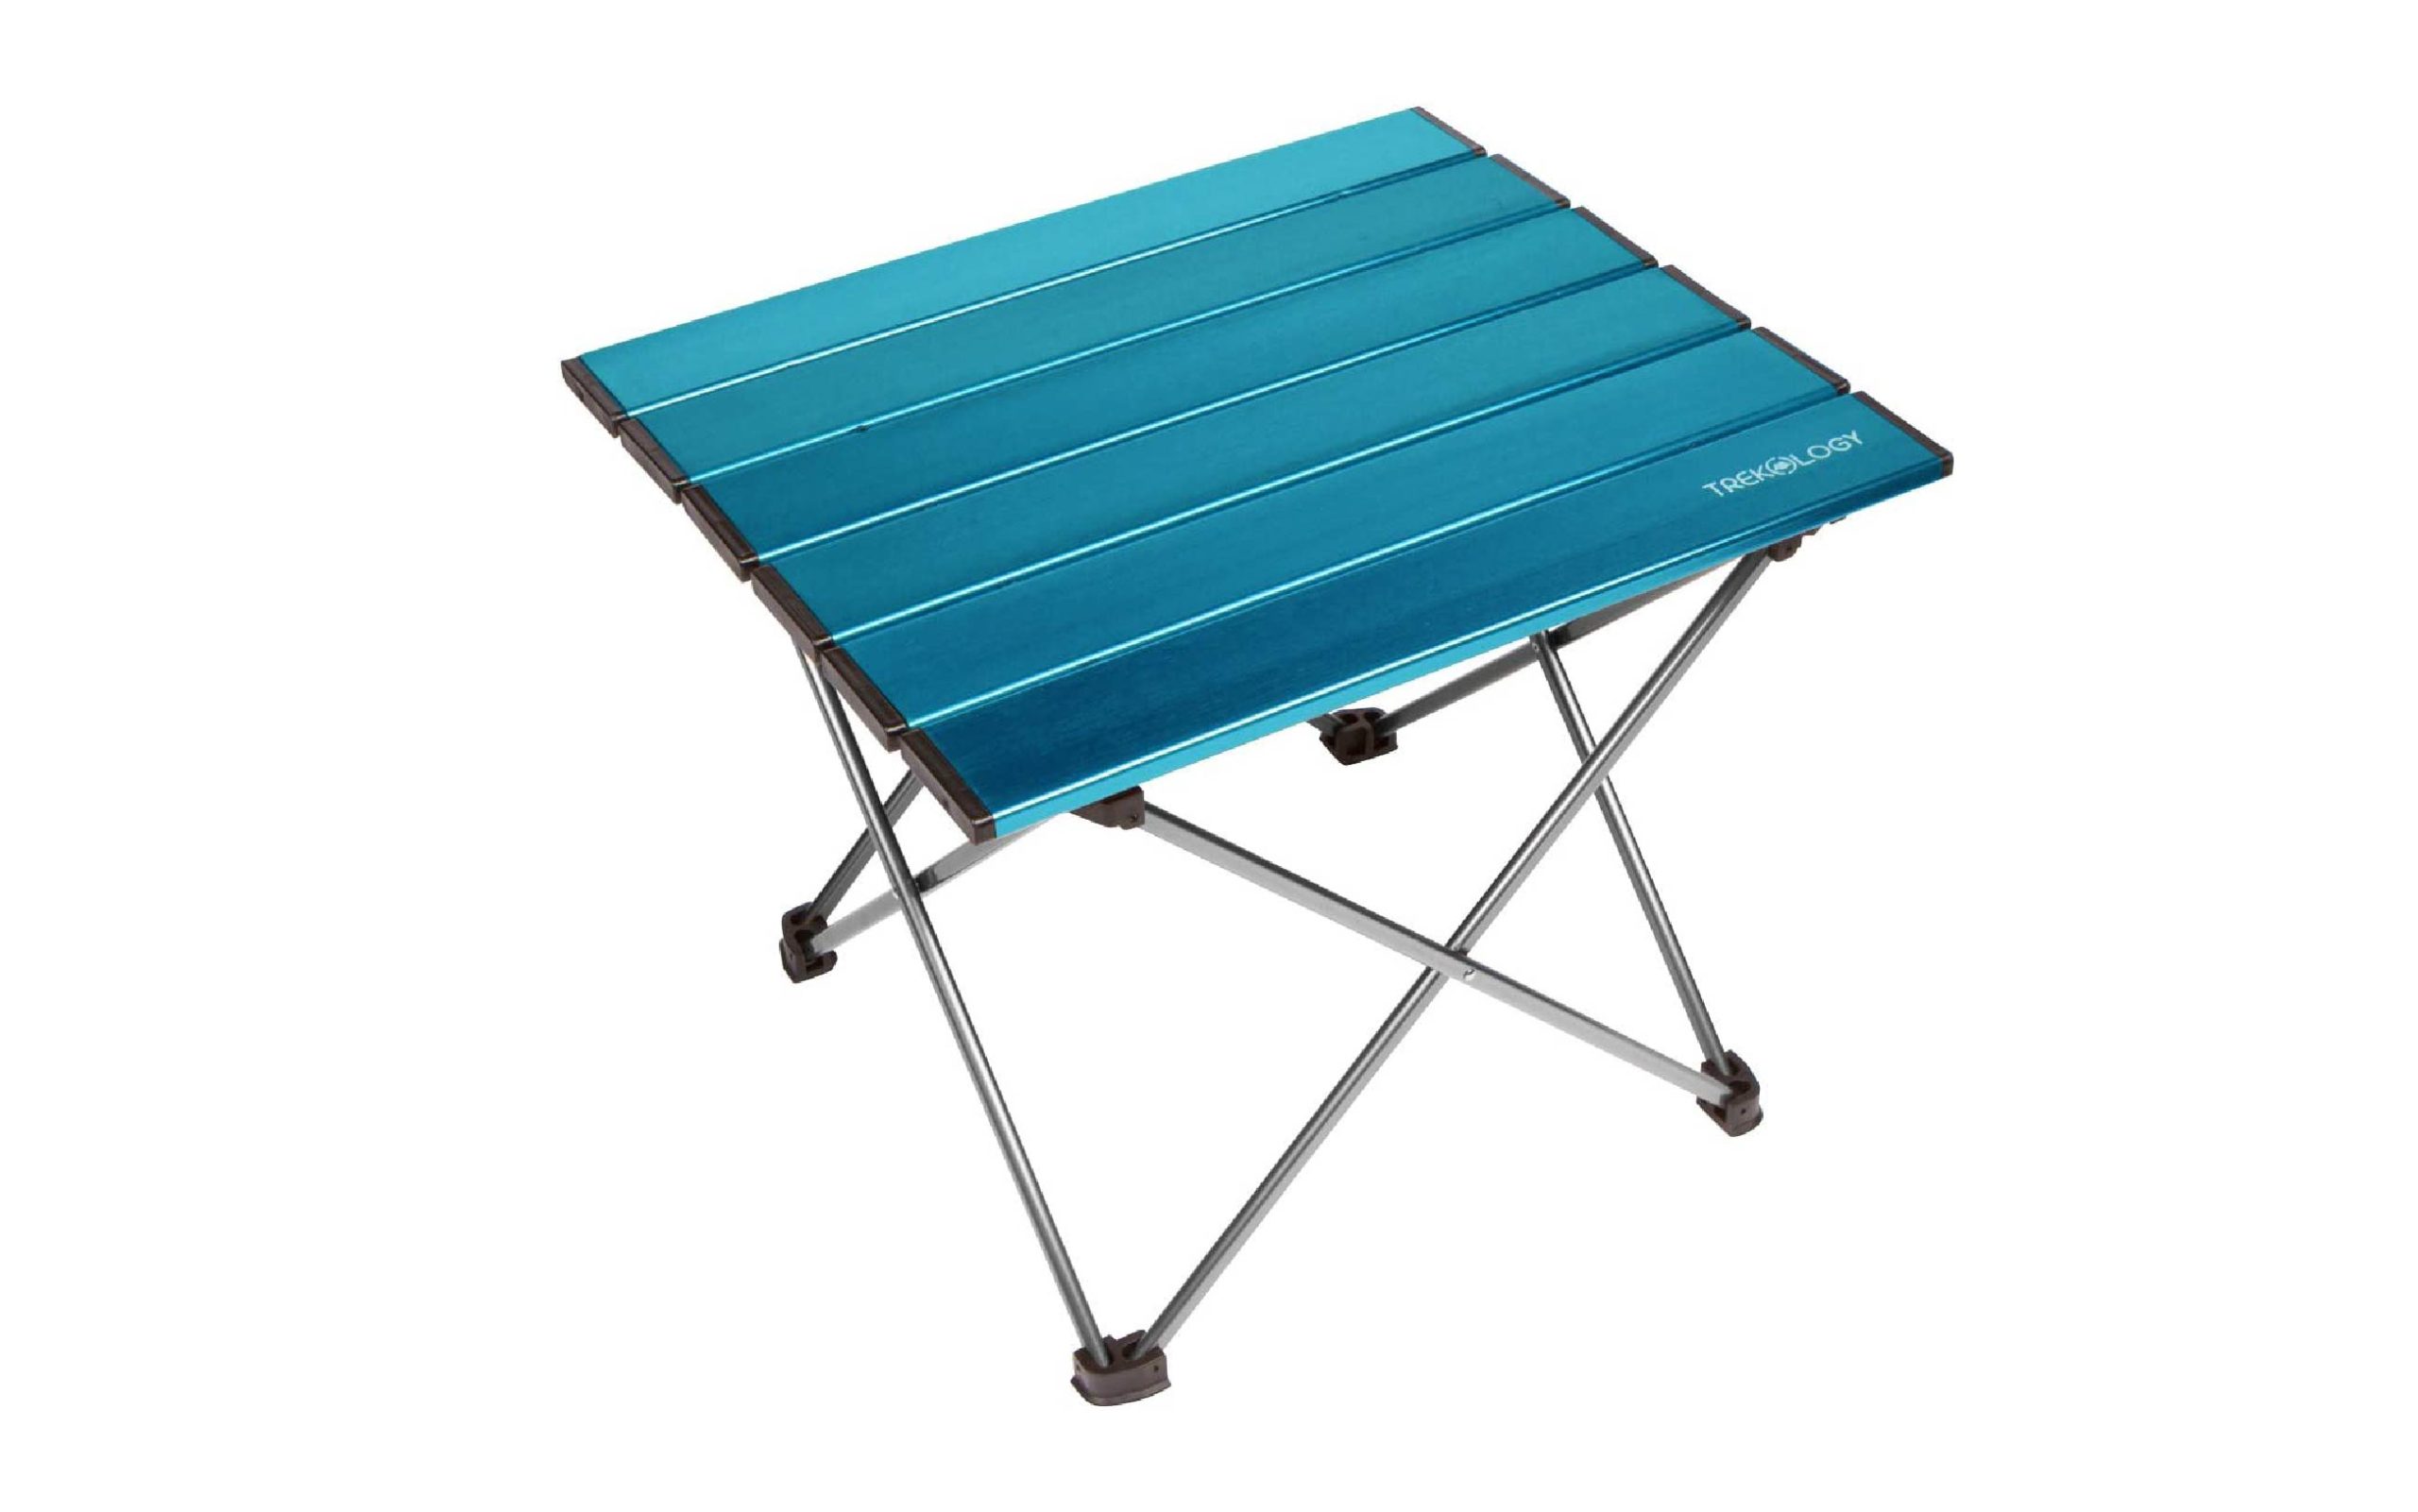 Best folding Camping tables - My Traveling Tents